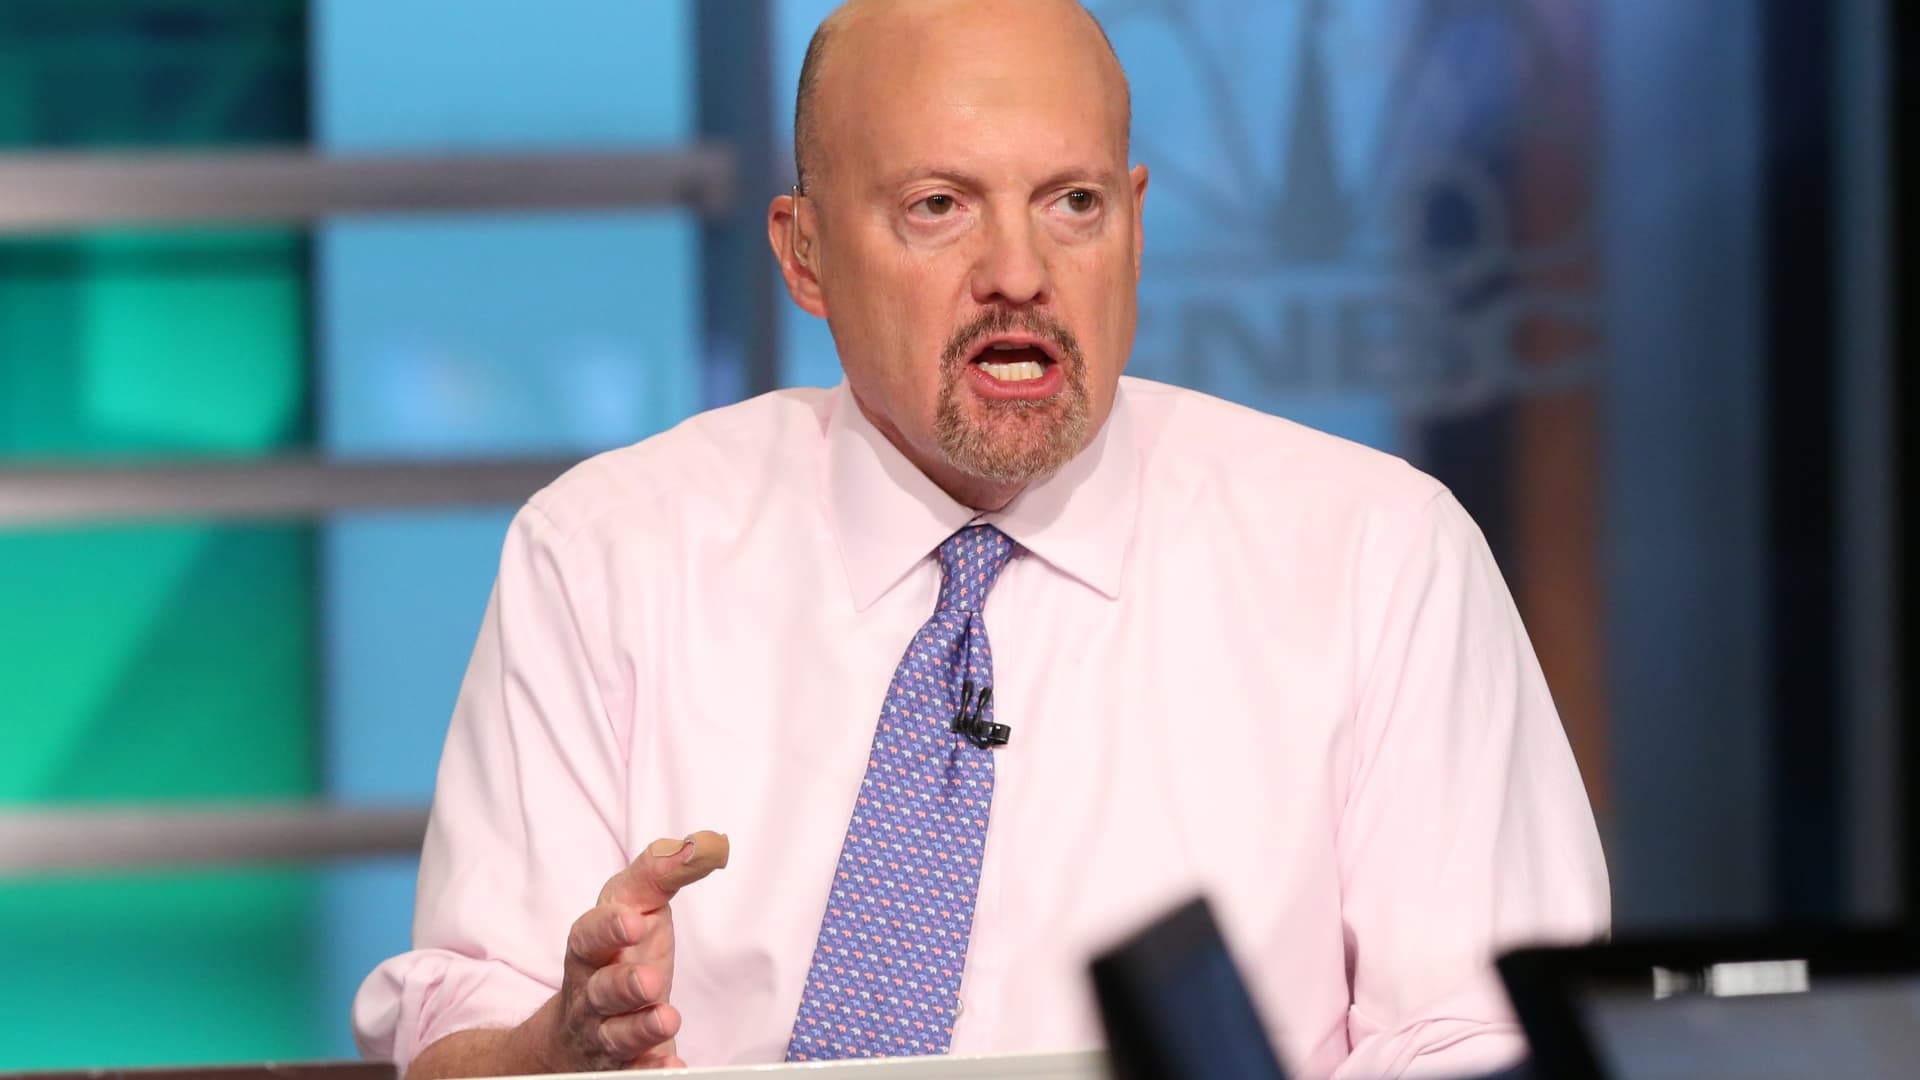 Cramer’s week ahead: Glimpse for earnings from Goal, CrowdStrike, Kroger and more